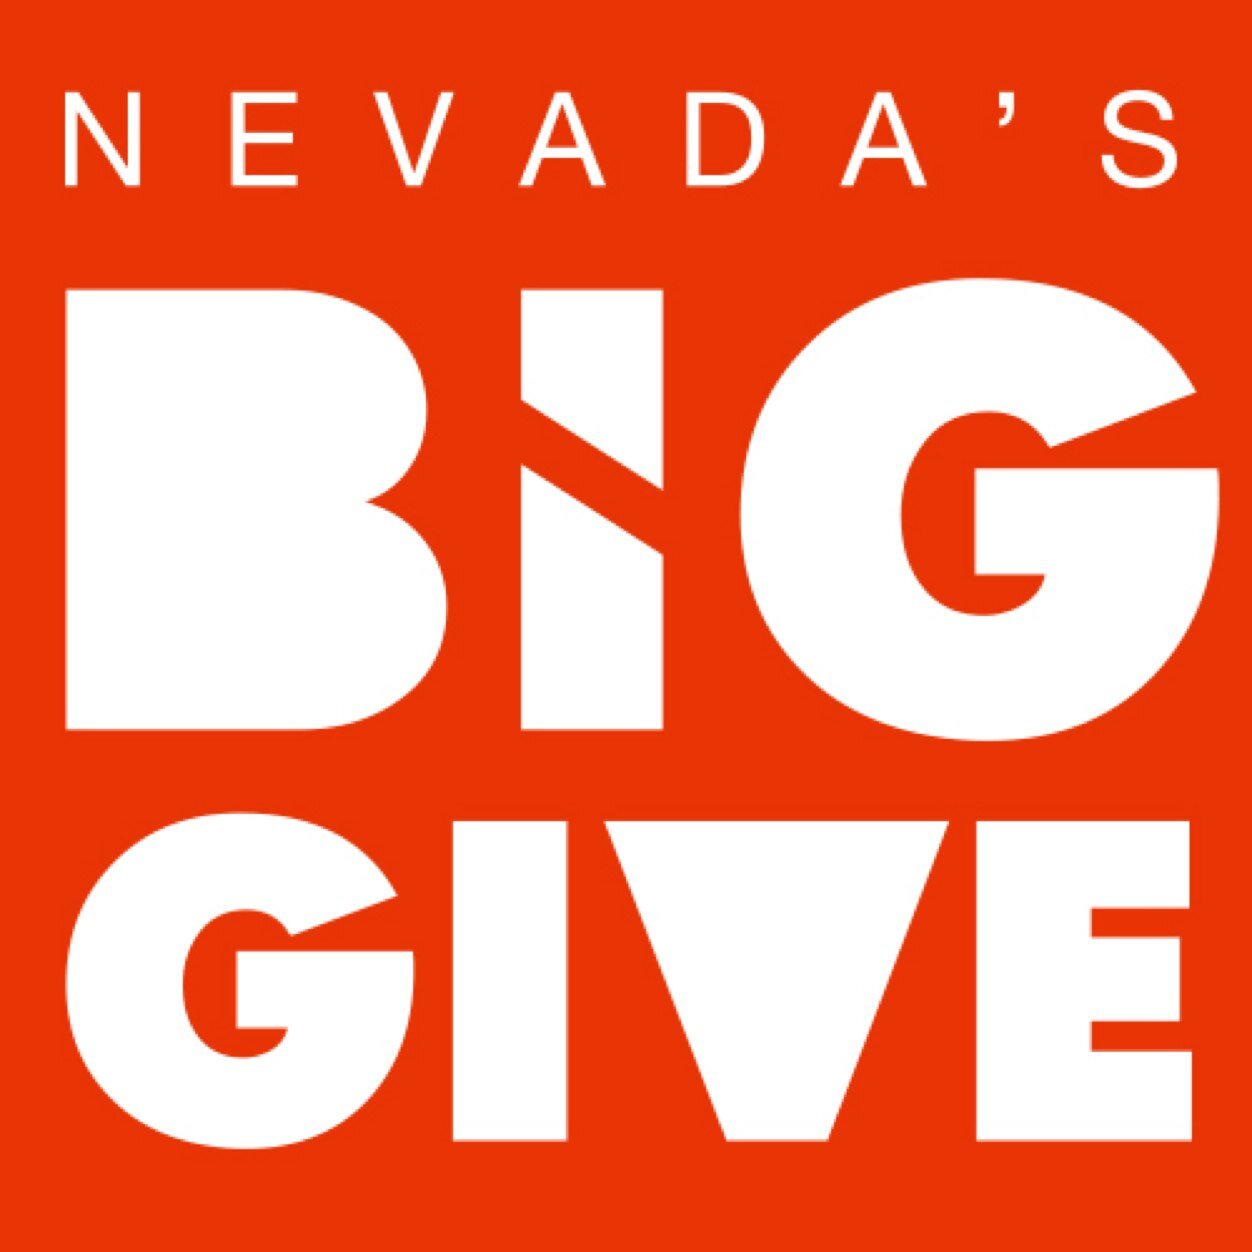 On March 21, 2019, making a difference in Nevada is as simple as point, click, give. Give as little as $10! #givewhereyoulive #nvbiggive